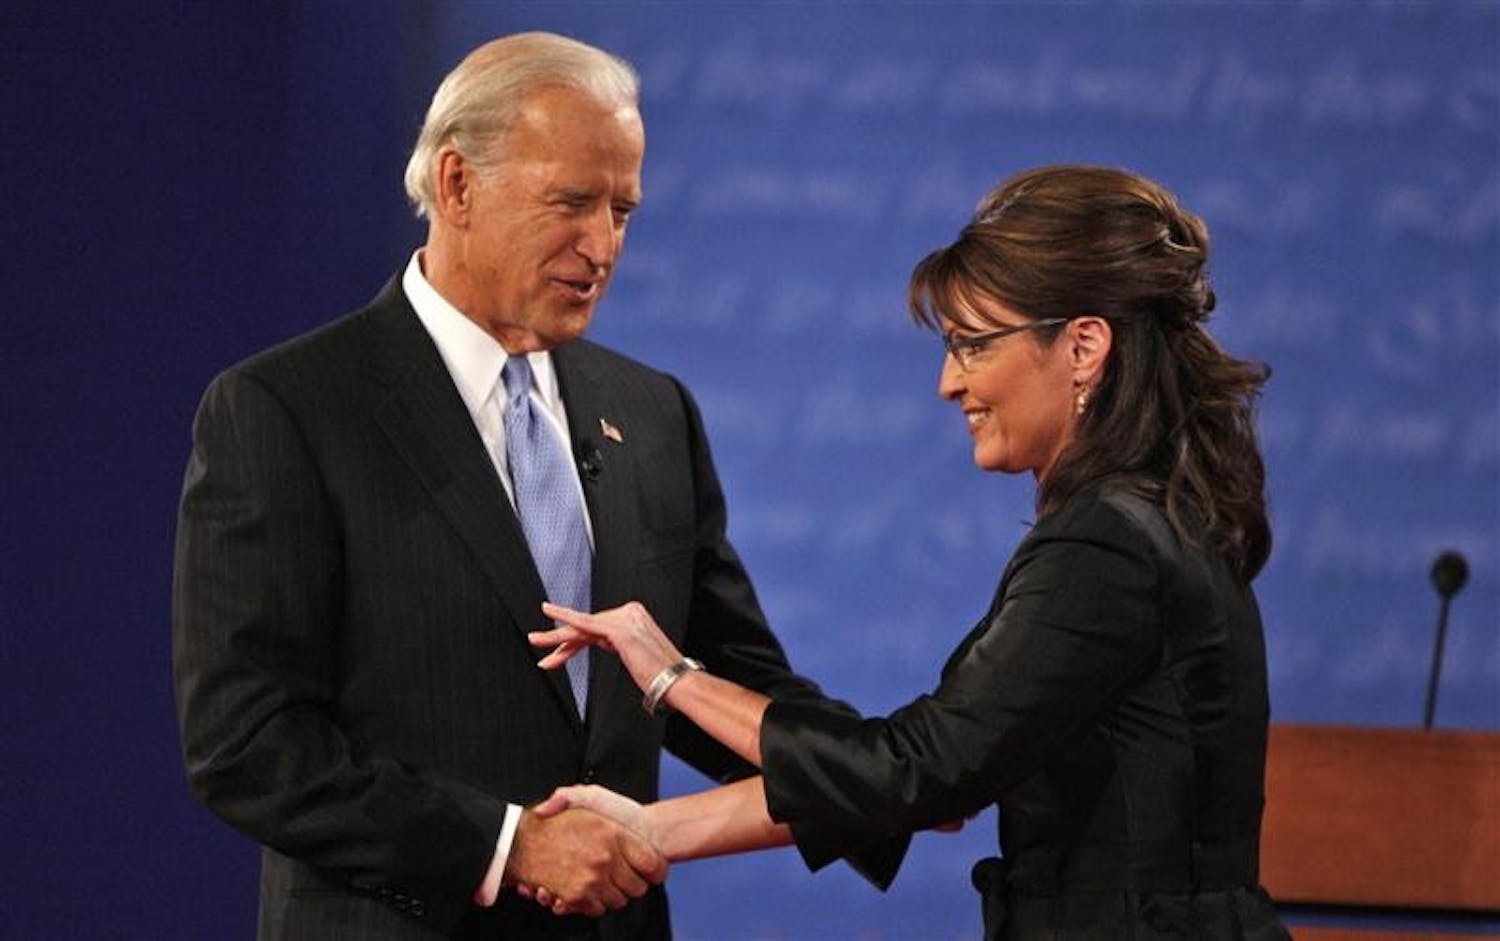 Democratic vice presidential candidate Sen. Joe Biden, D-Del., left, and Republican candidate Alaska Gov. Sarah Palin shake hands before the start of a vice presidential debate at Washington University in on Thursday in St. Louis, Mo.